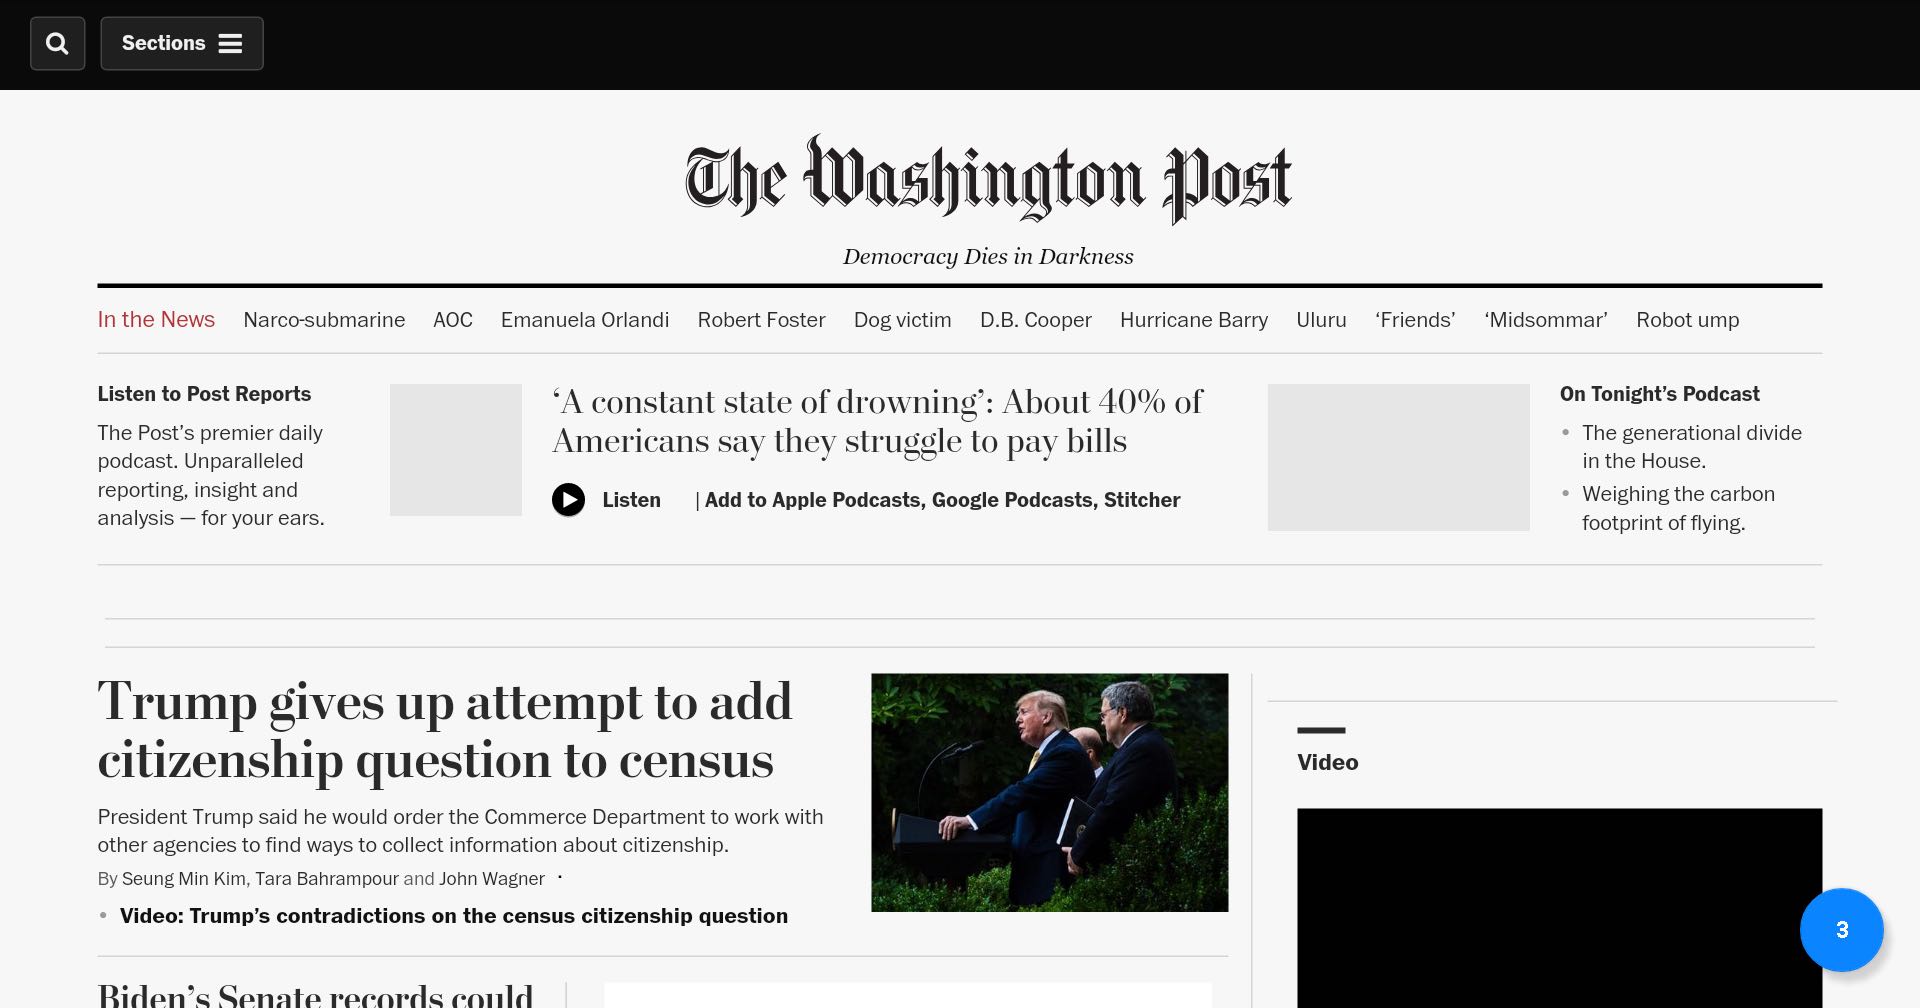 The Washington Post home page on July 7, 2019